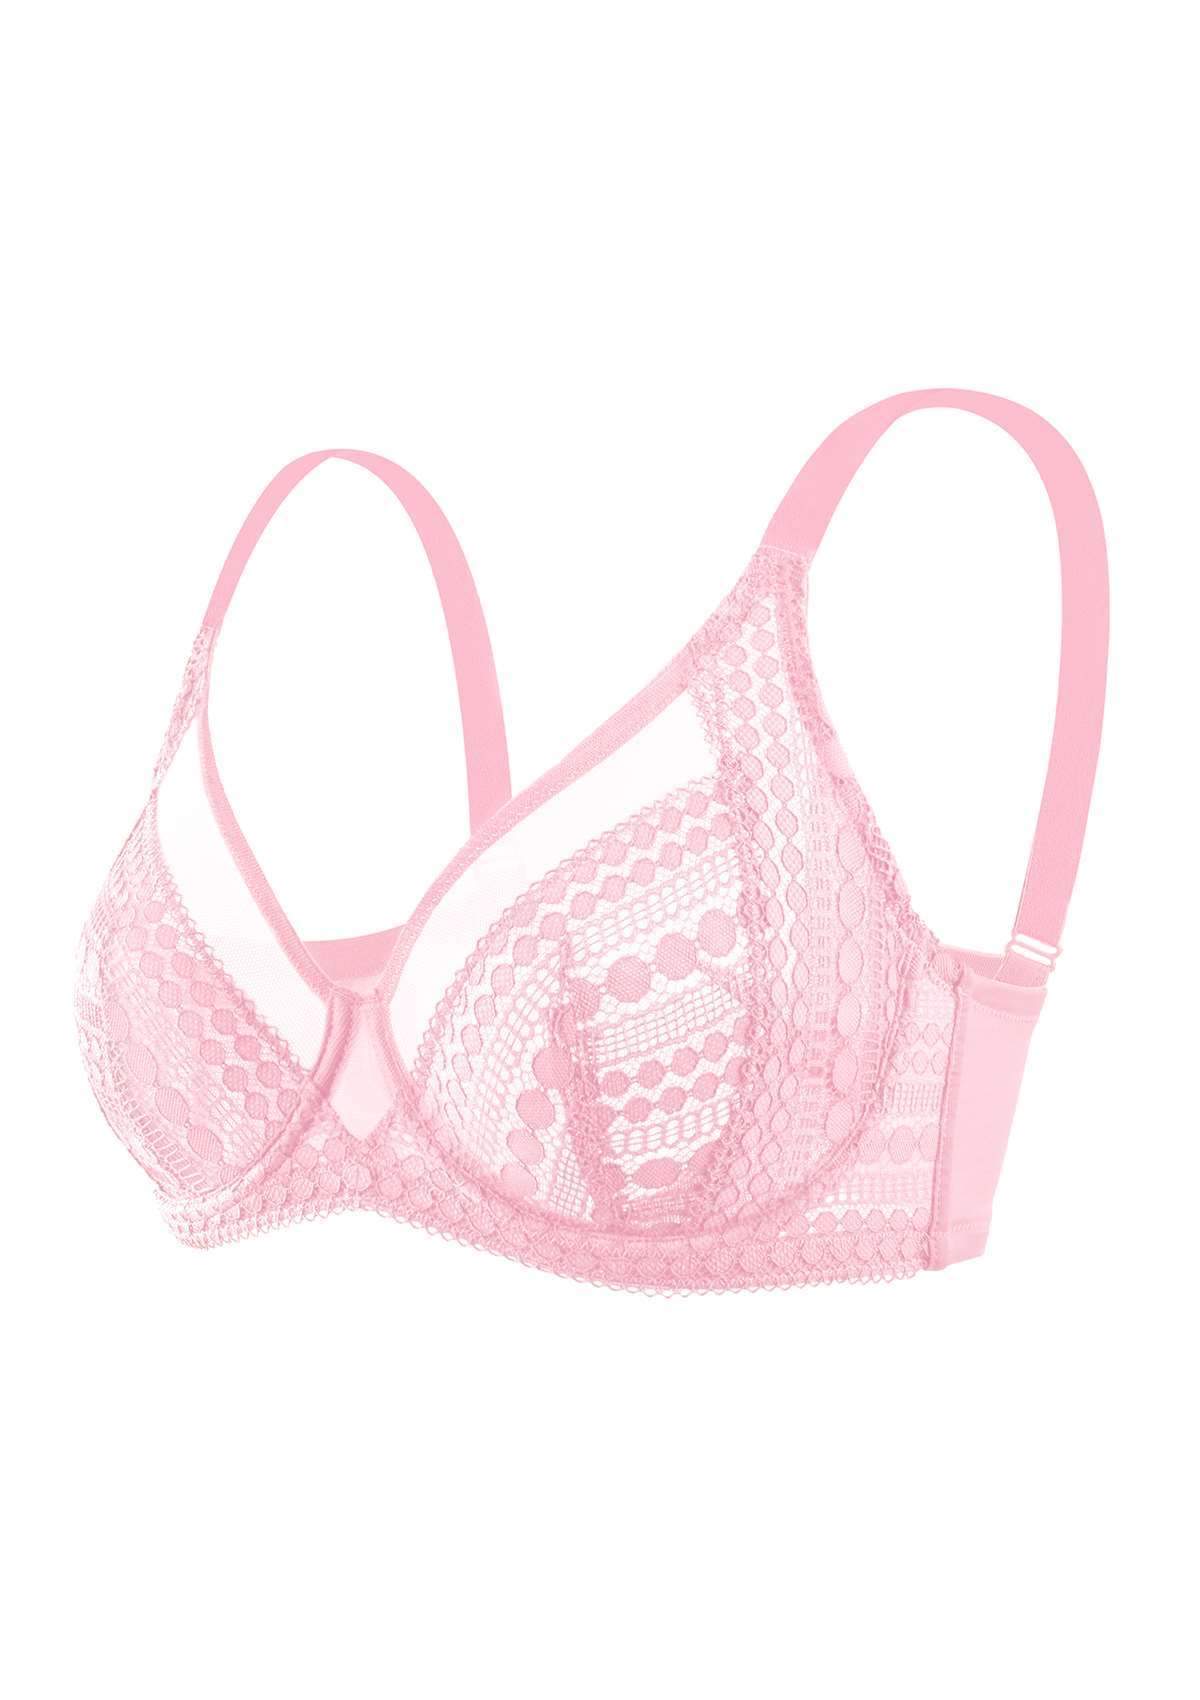 HSIA Heroine Lace Bra And Panties Set: Most Comfortable Supportive Bra - Pink / 40 / DDD/F